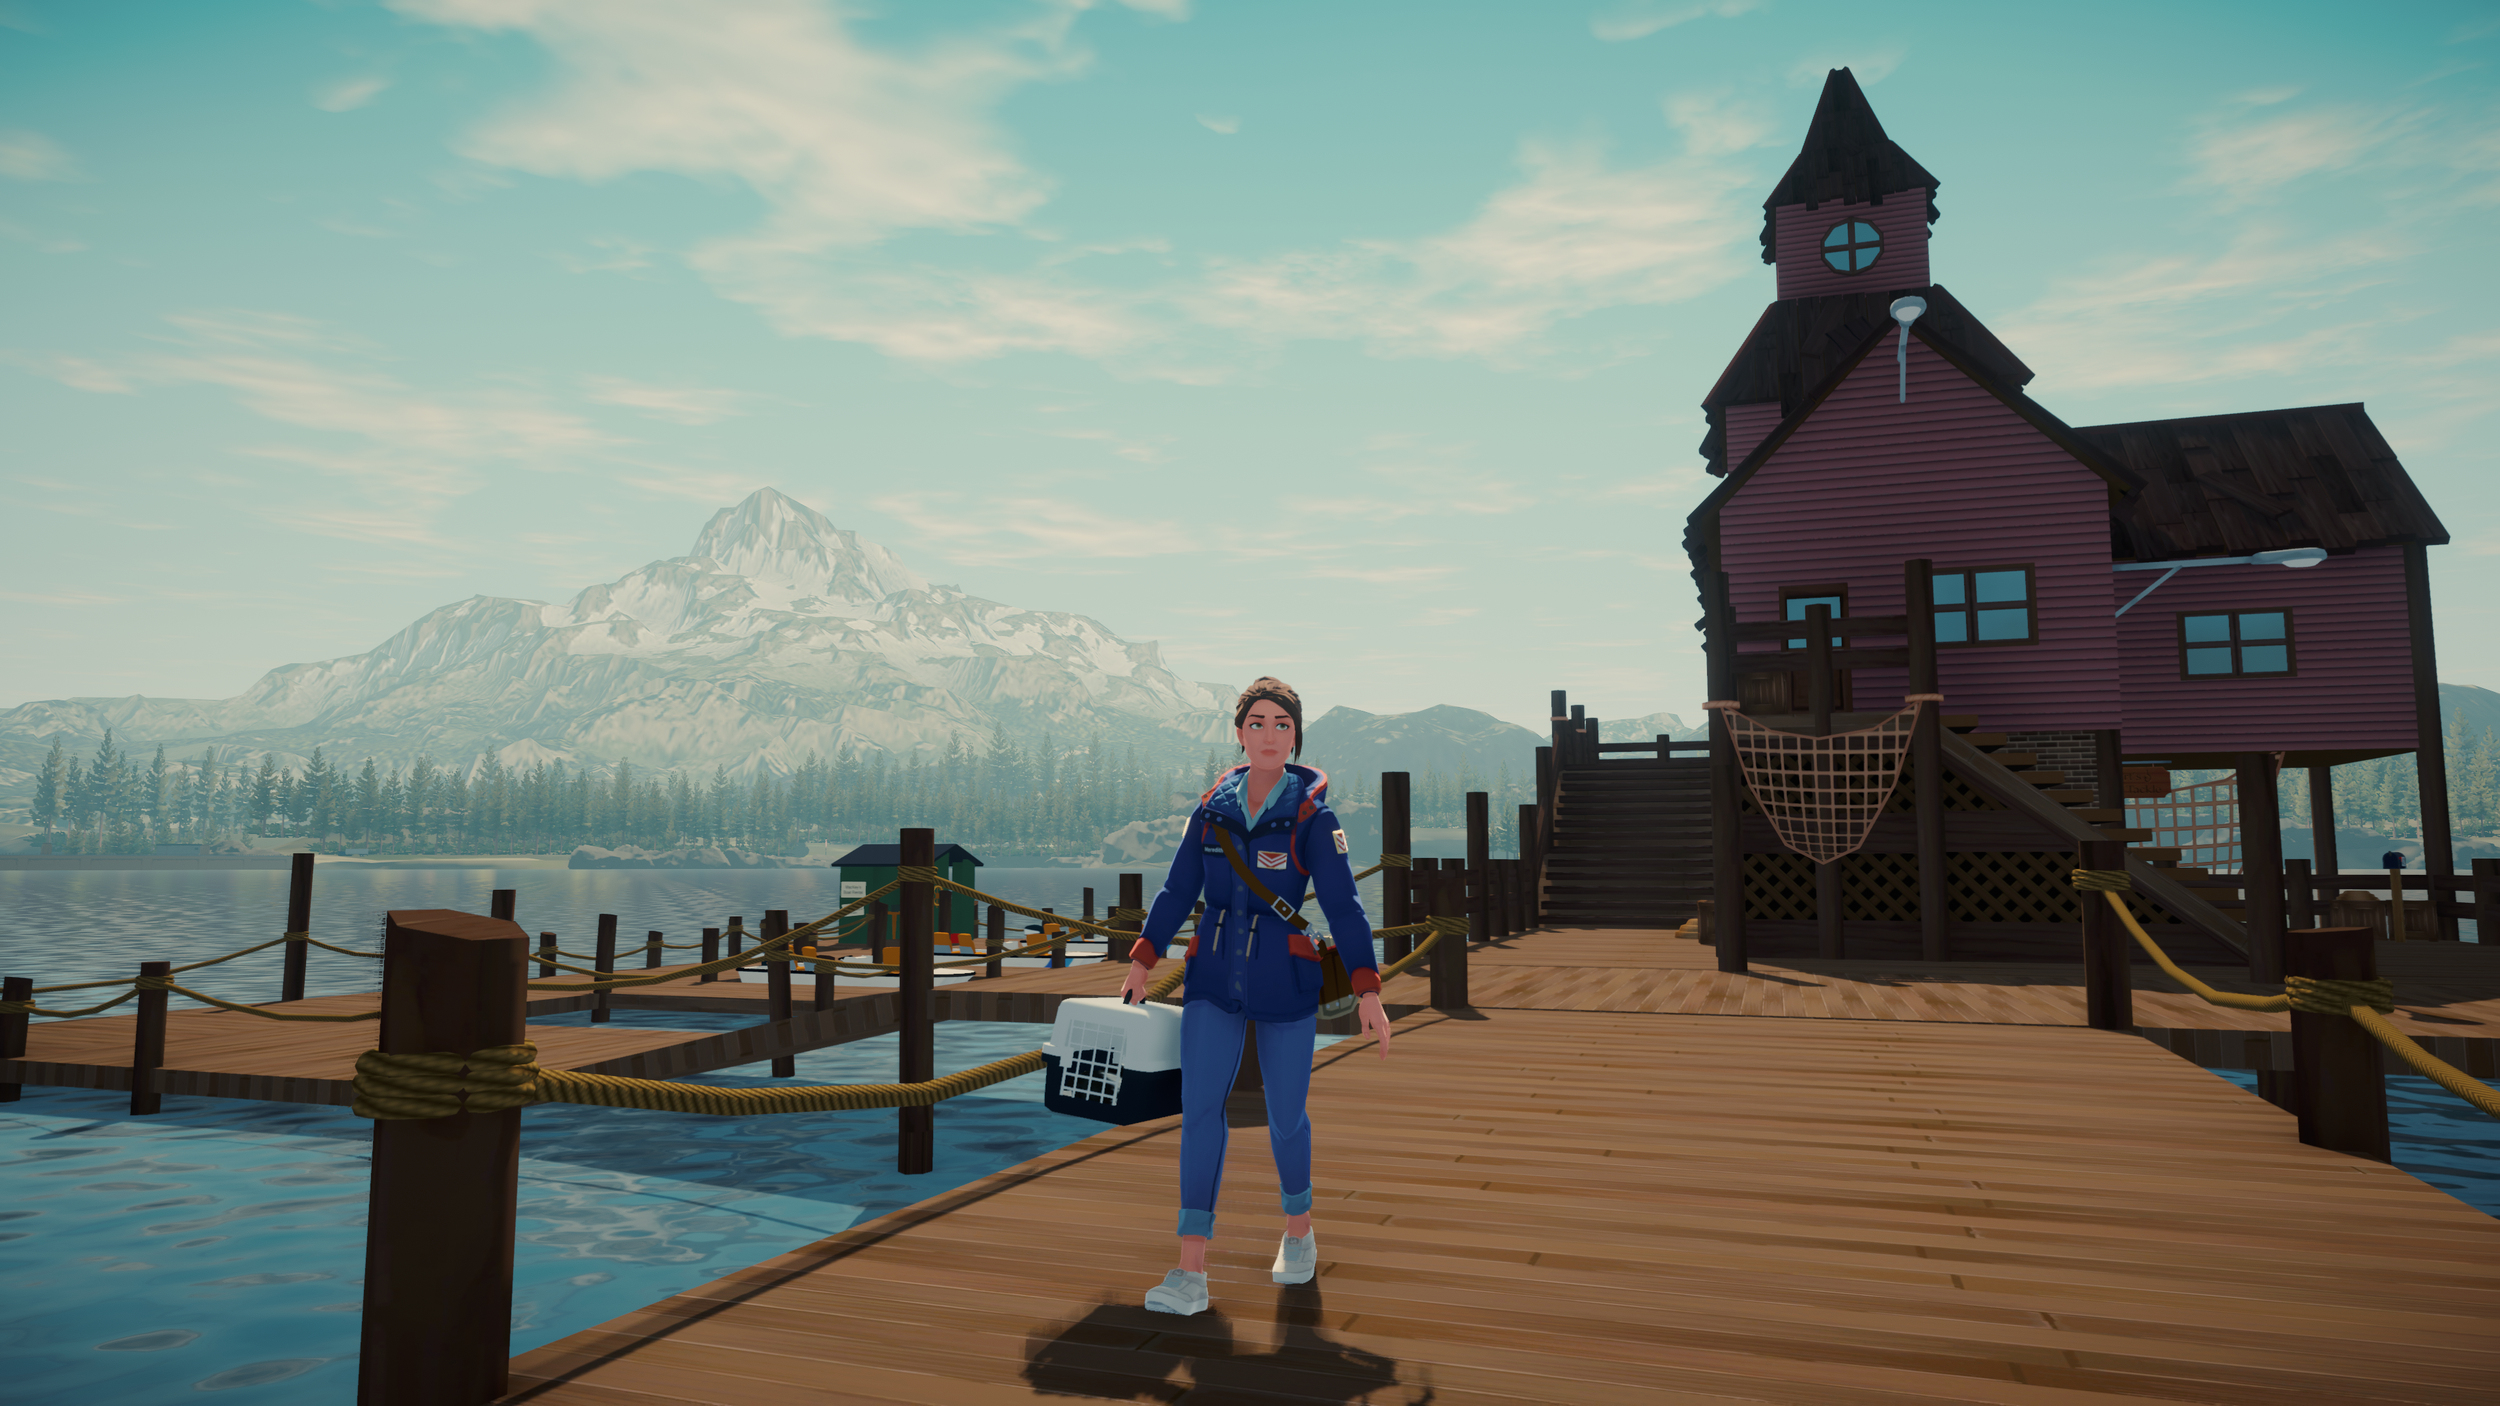 A screenshot from Lake. A woman carries a cat carrier away from a house on a dock. A snowy mountain looms in the background.